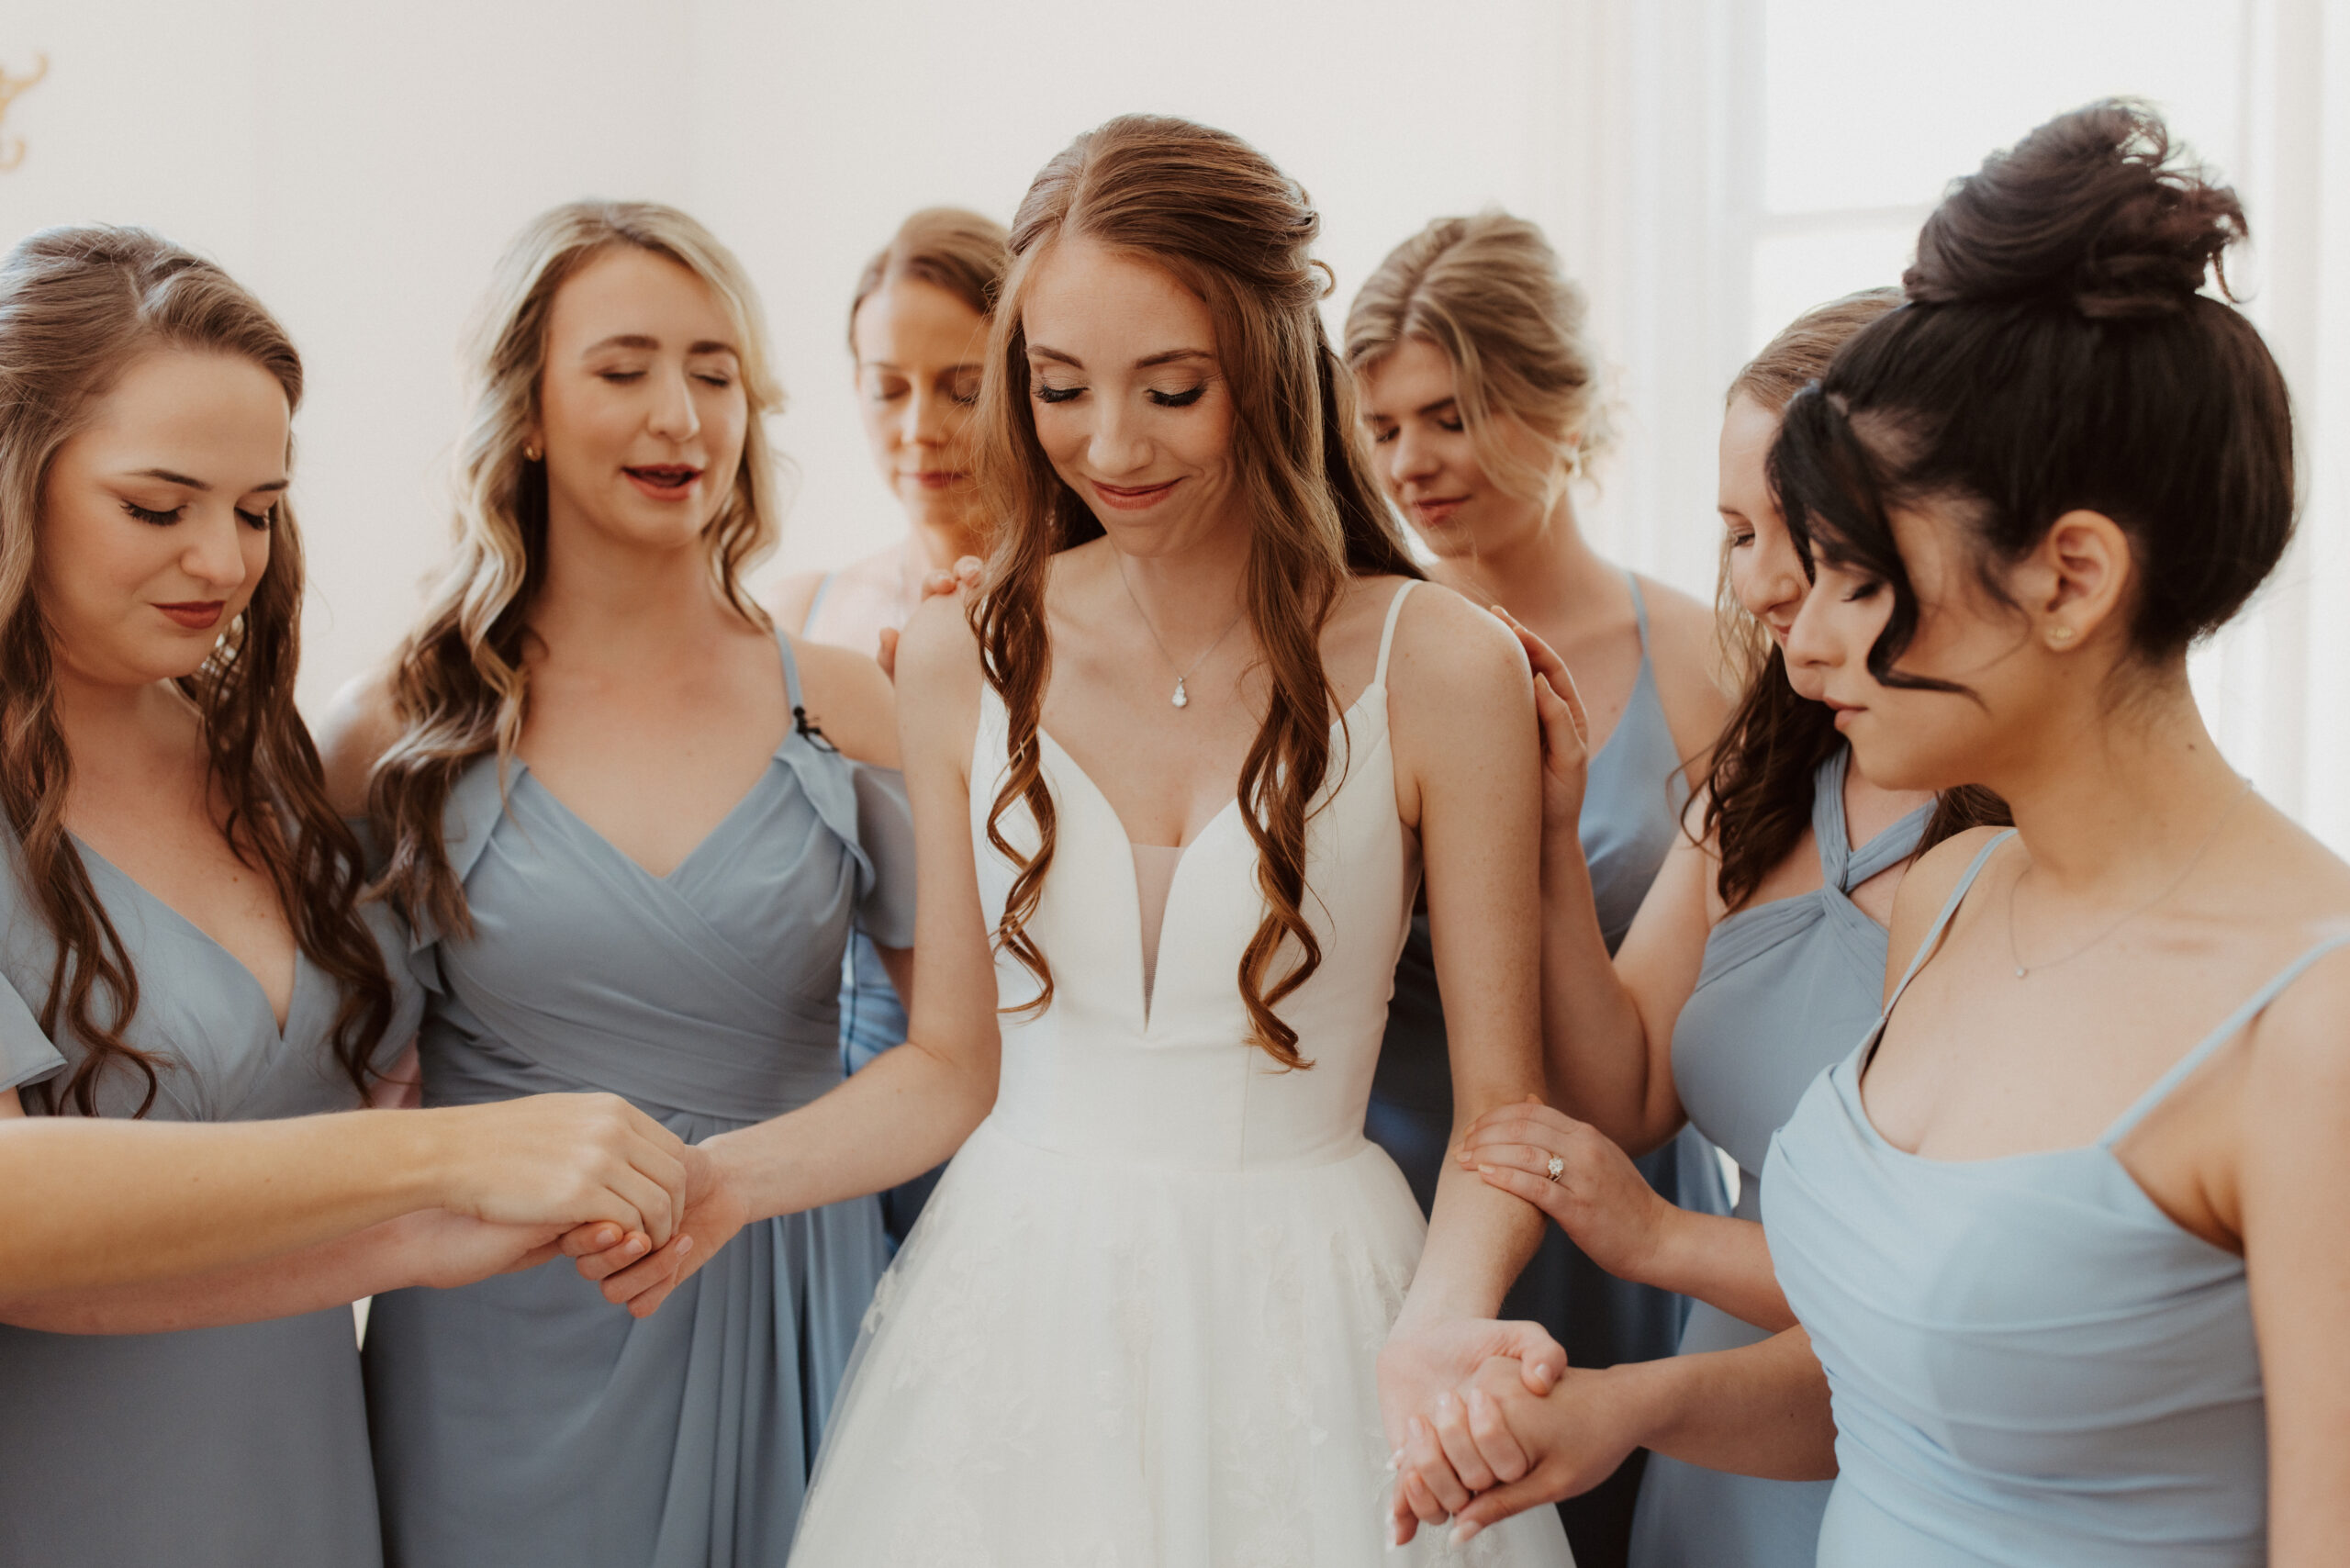 Bride and bridesmaids showcasing their flawless wedding hair and makeup by Kristy's Artistry Design Team in Orlando